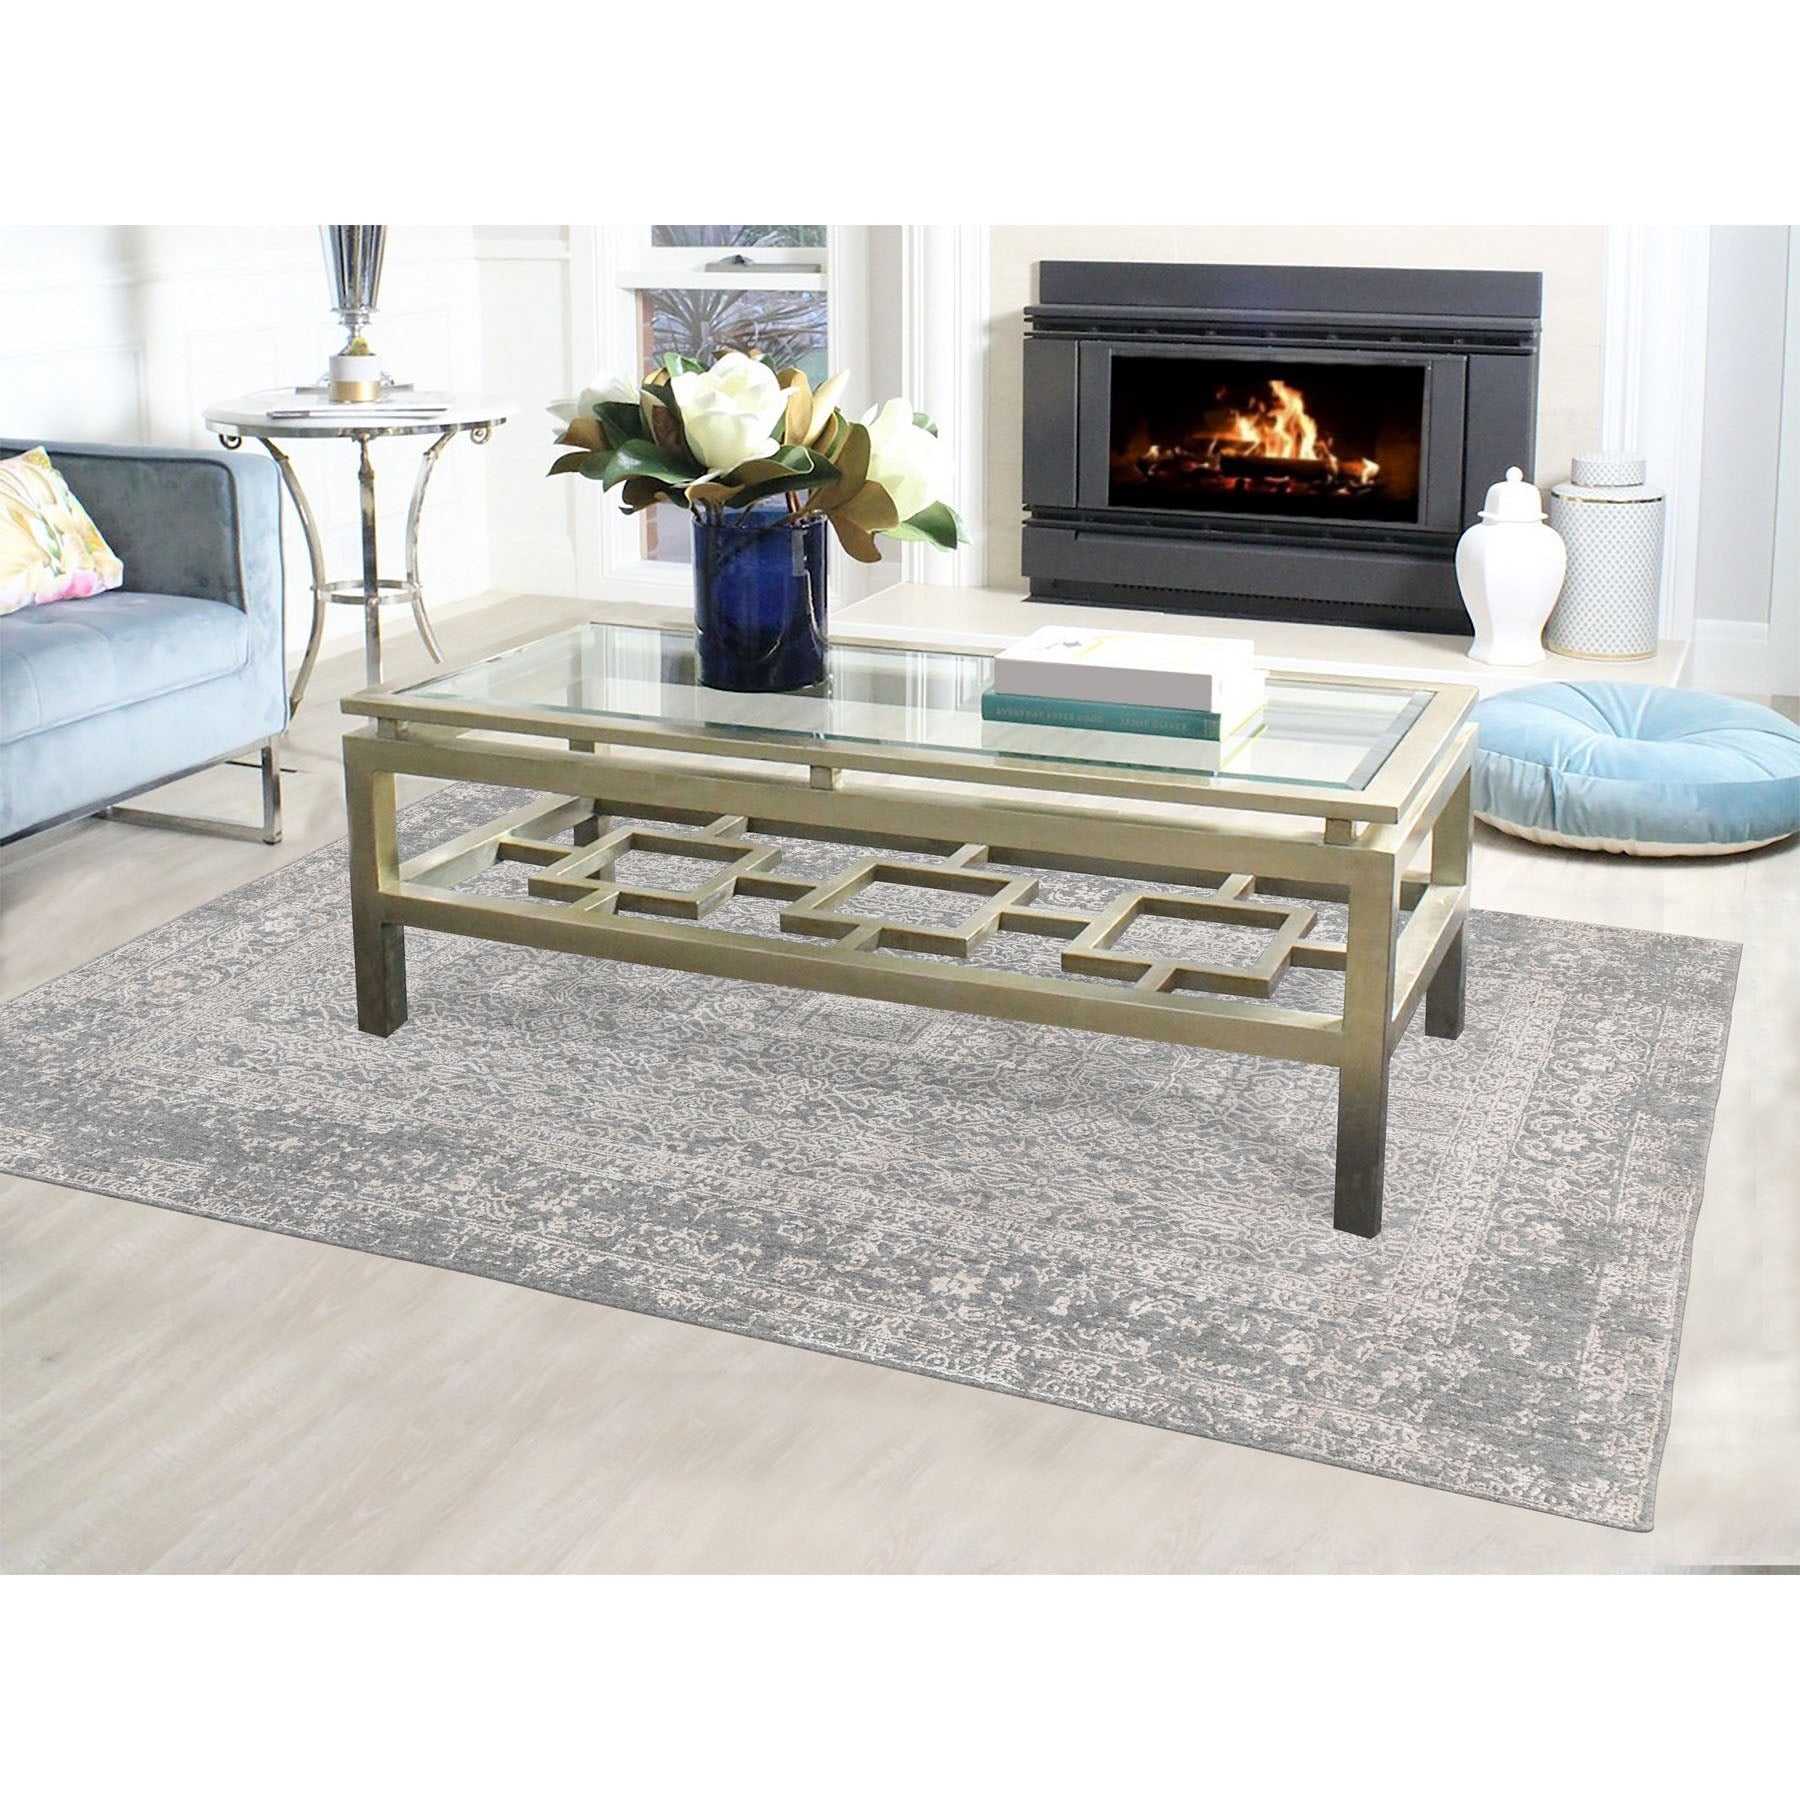 Hand Loomed Modern and Contemporary Area Rug > Design# CCSR58409 > Size: 5'-10" x 9'-1"